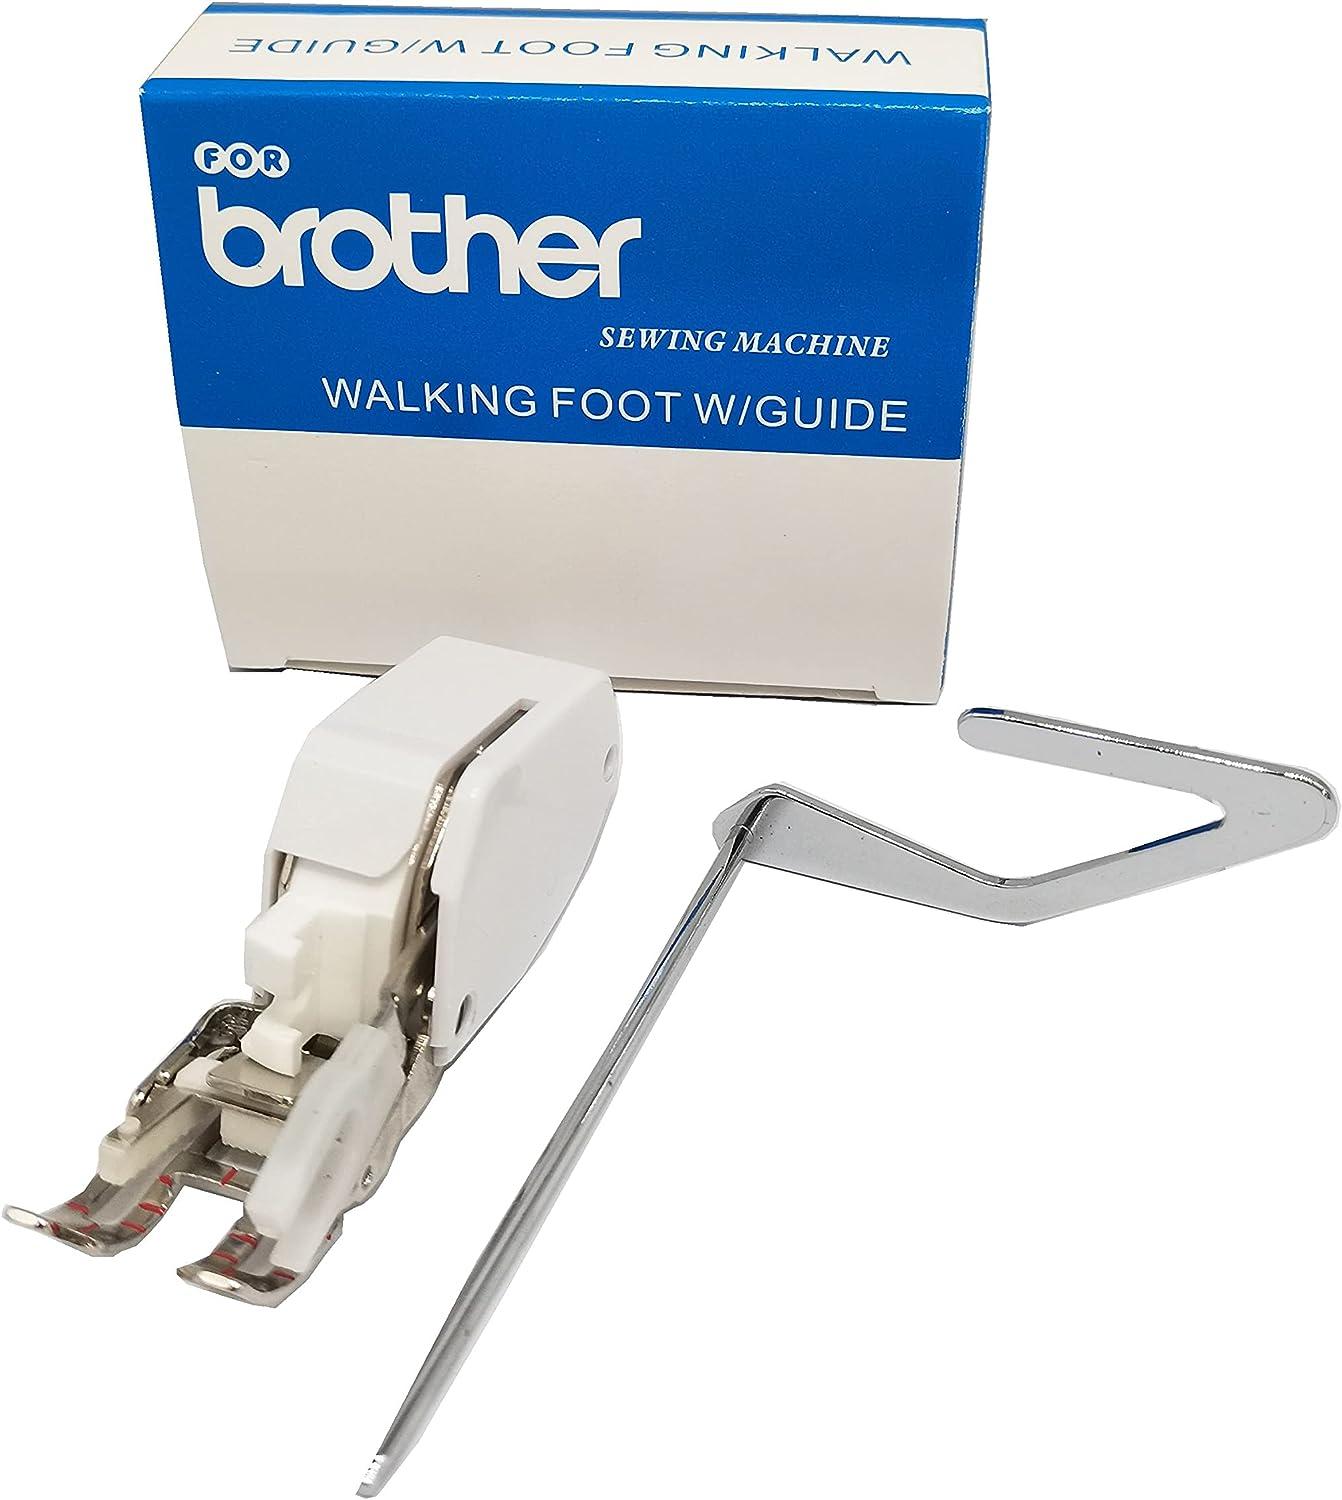 HONEYSEW Open Toe Walking Foot W/Guide for Brother Sewing Machine Quilting  and Sewing Stitch Through Multiple Layers